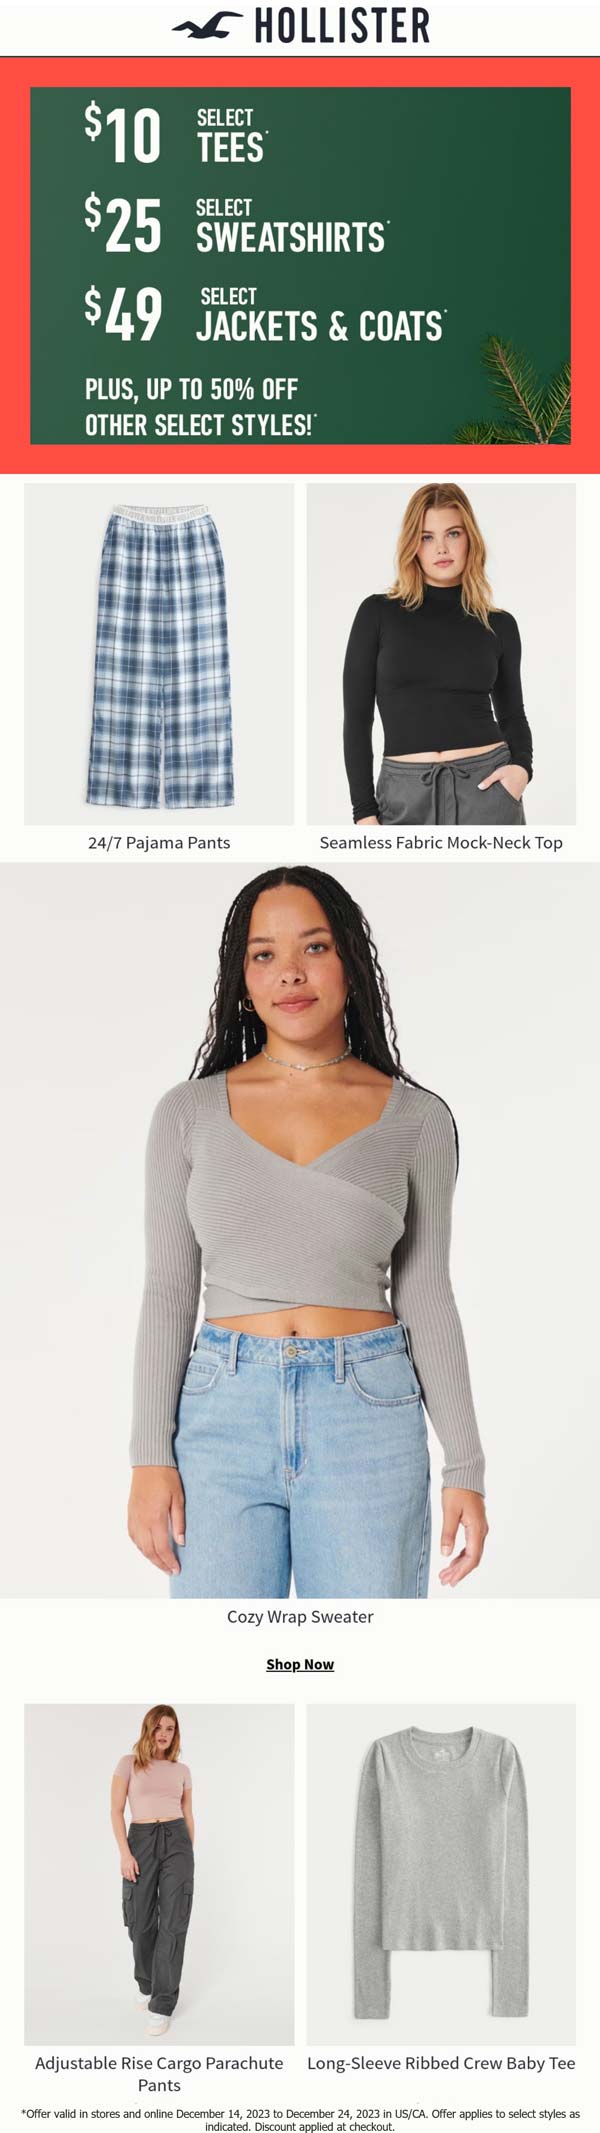 Hollister stores Coupon  $25 sweatshirts & more at Hollister, ditto online #hollister 